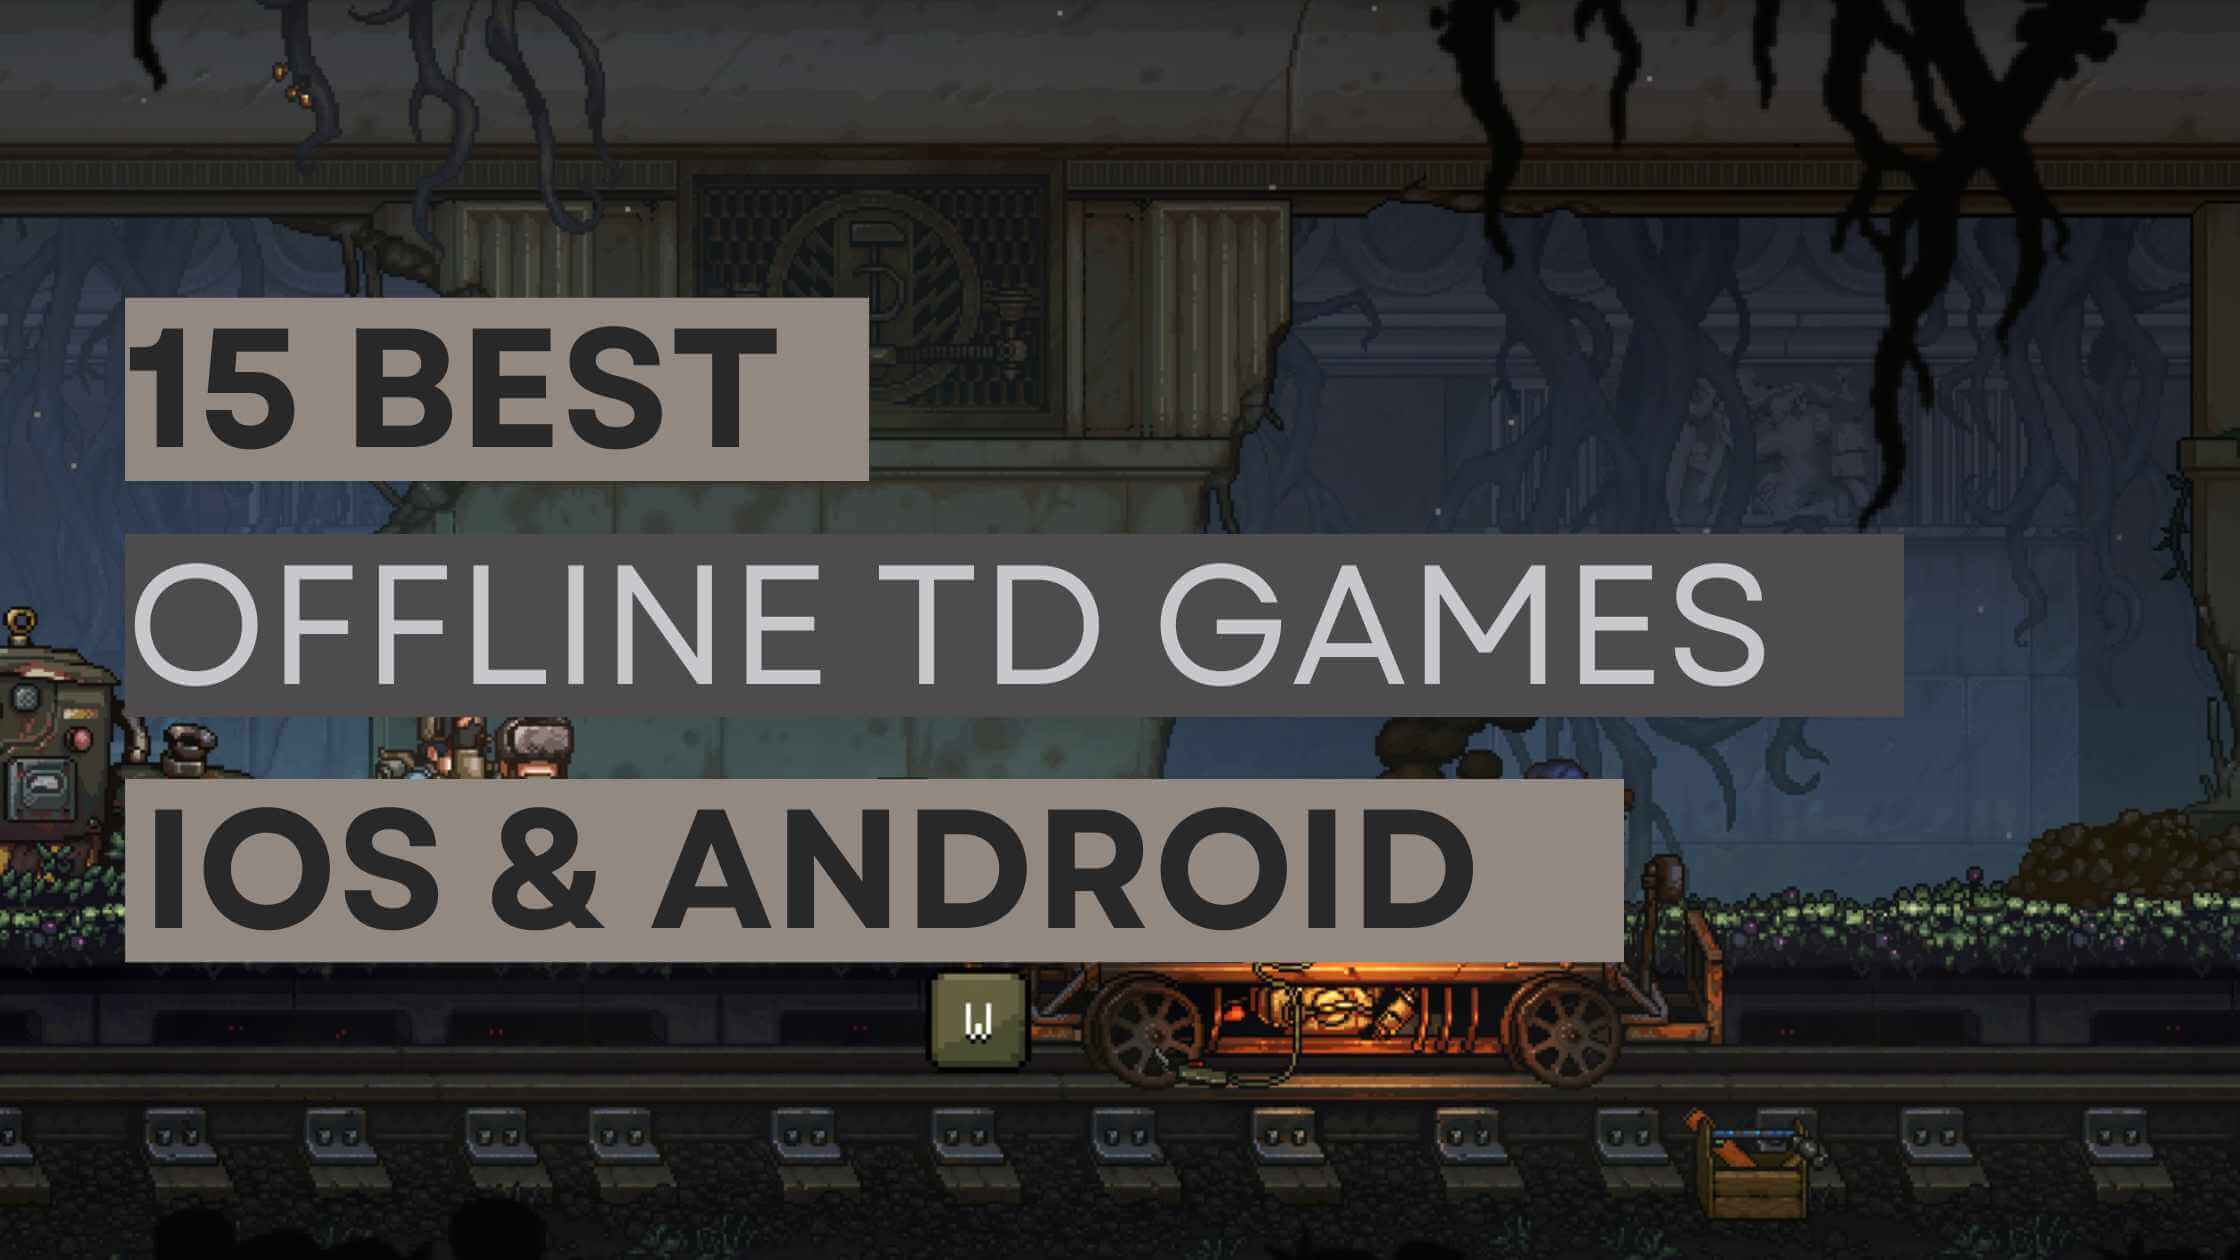 Best Offline tower defense games for IOS and Android